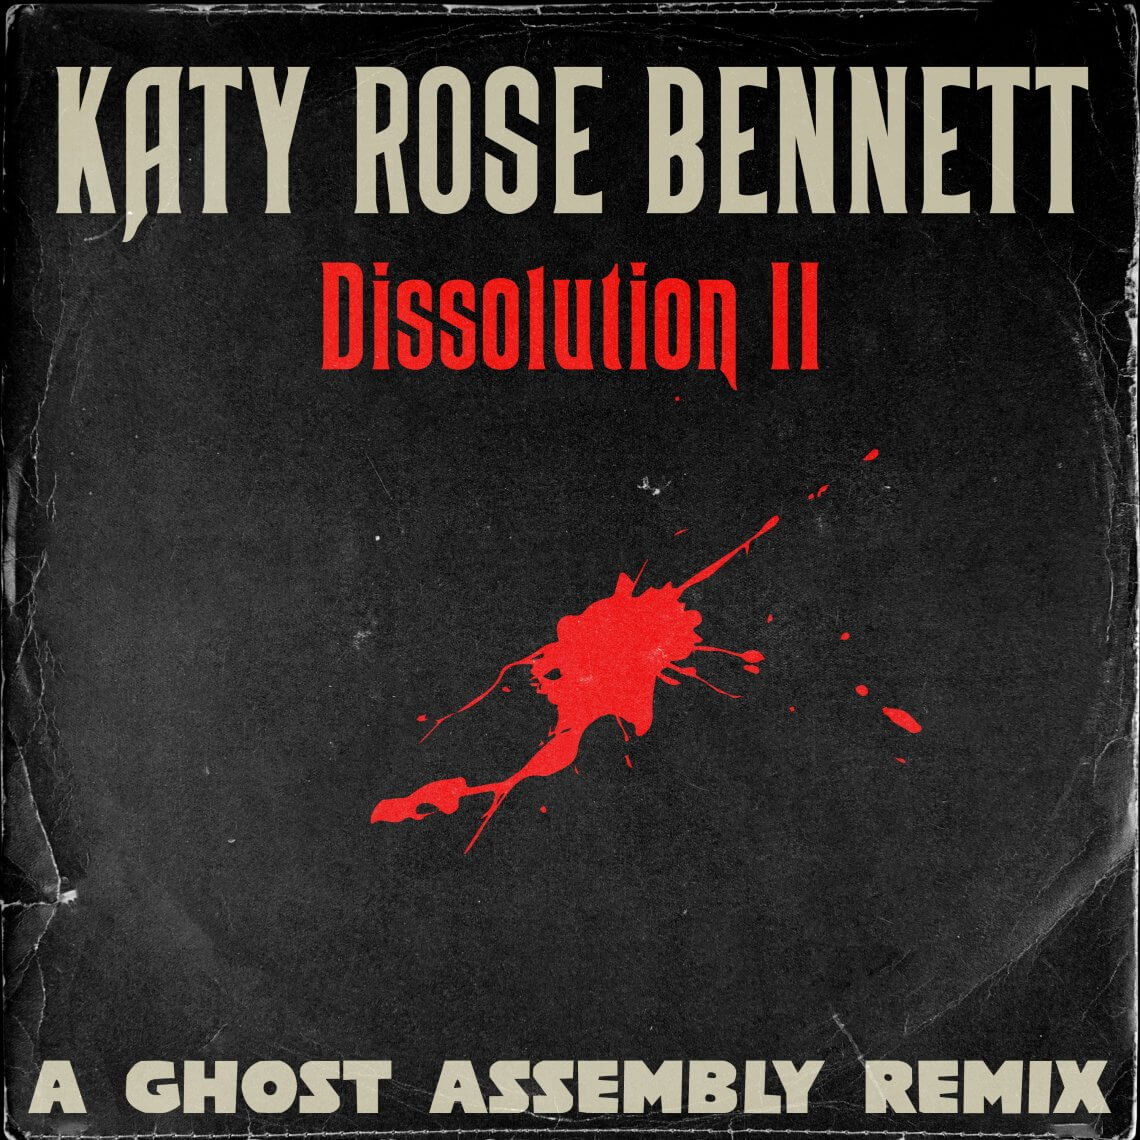 Artwork in the style of an old, slightly battered 7-inch single. The sleeve is black and a bit torn. The artist name in a white 70s gothic font is Katy Rose Bennett. There is a splash of blood in the centre of the design. At the boot on I’d the sleeve it says A Ghost Assembly Remix in a 70s-style filmic font.